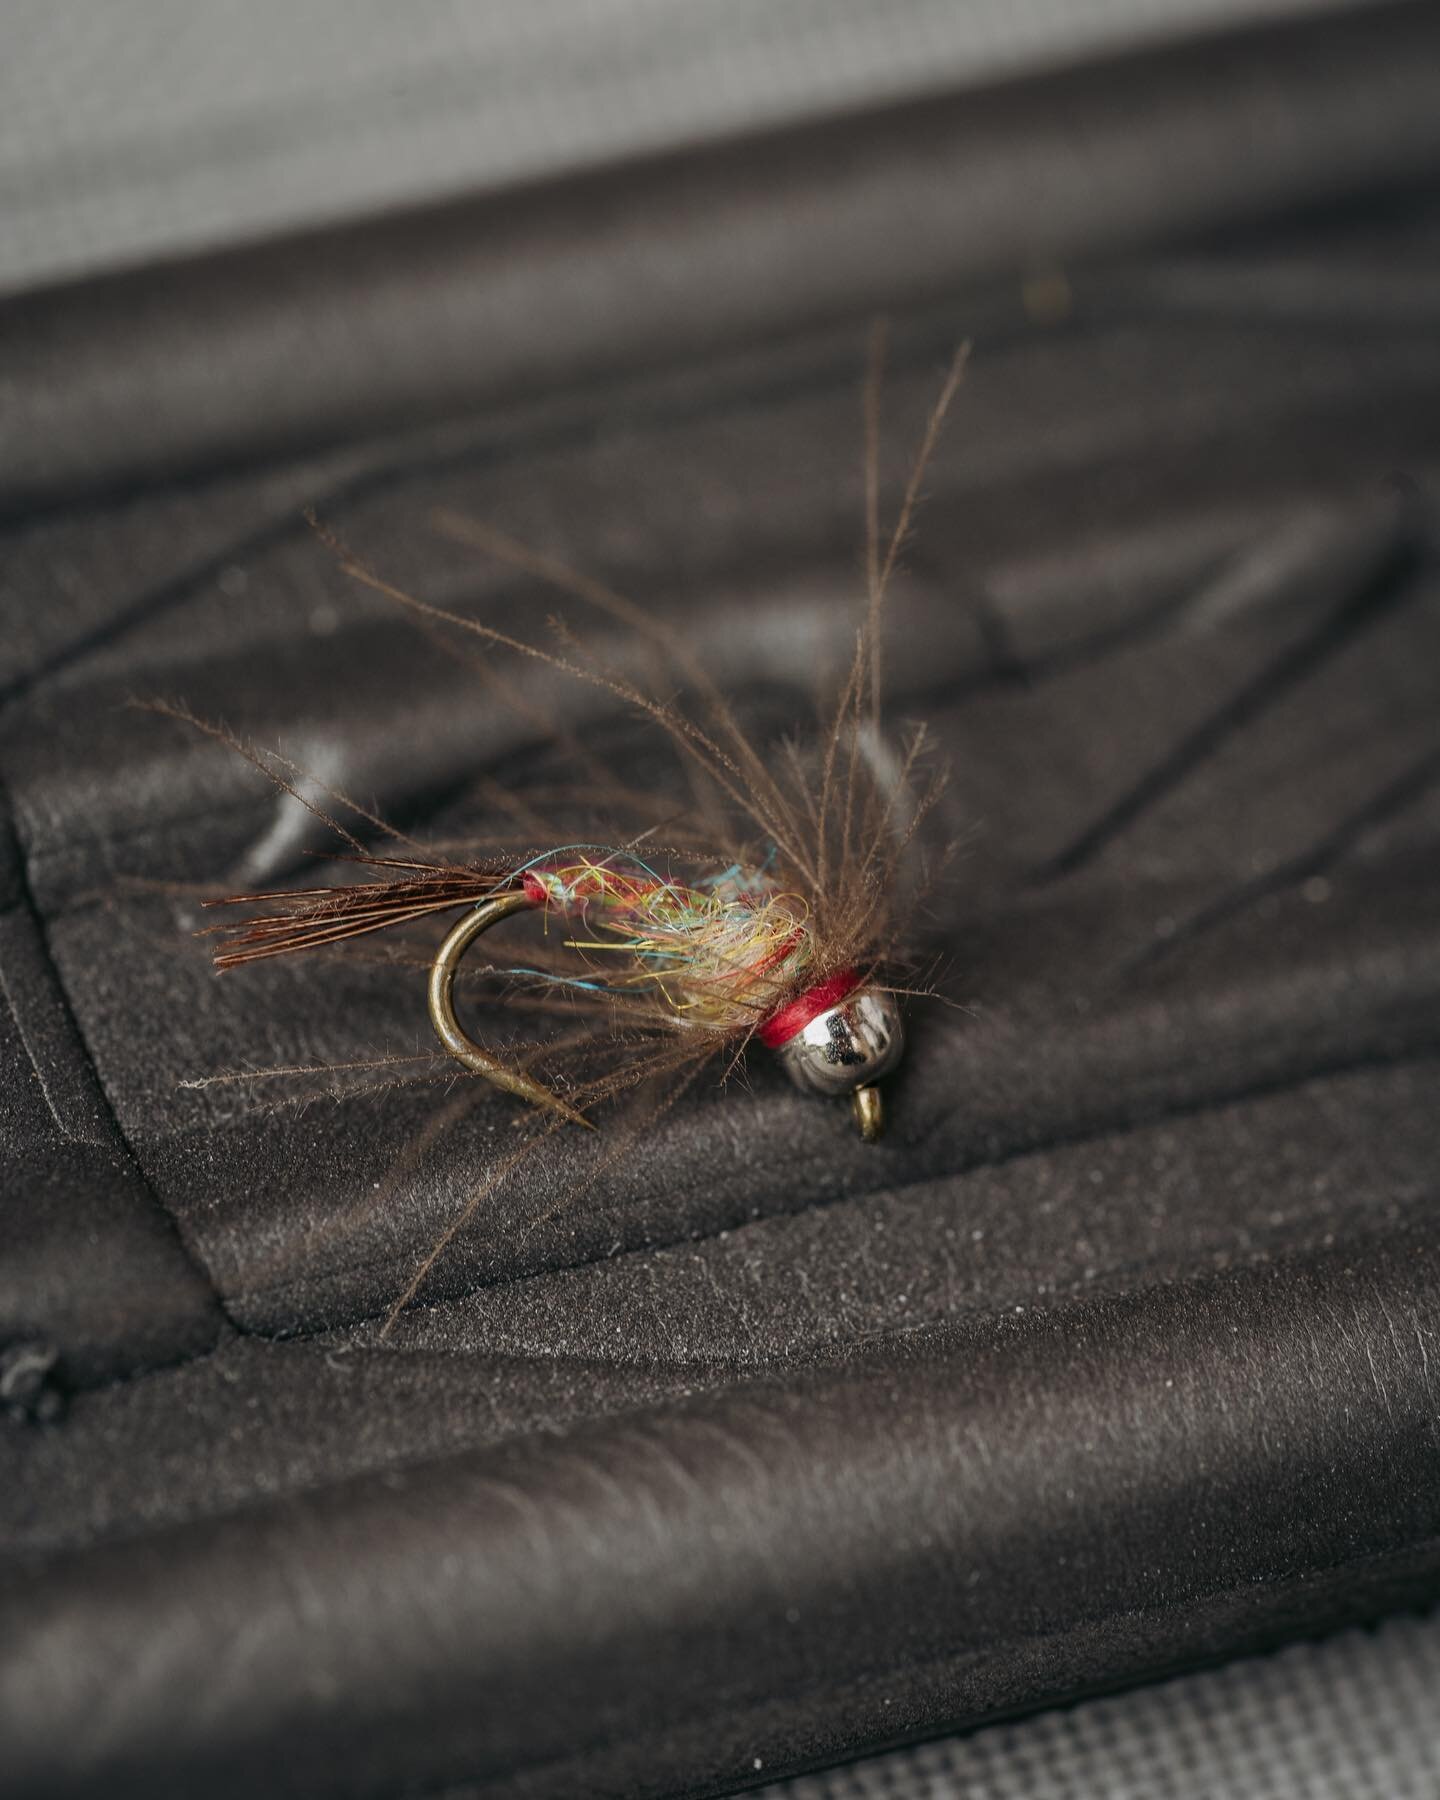 A great attractor this time of year is Lance Egan&rsquo;s CDC Rainbow Warrior from @umpquafeathermerchants 

Great emerger type attractor that can imitate many things but perfect for spring blue wings.

Come load up!
-
-
-
-
#arboranglers #flyfish #f